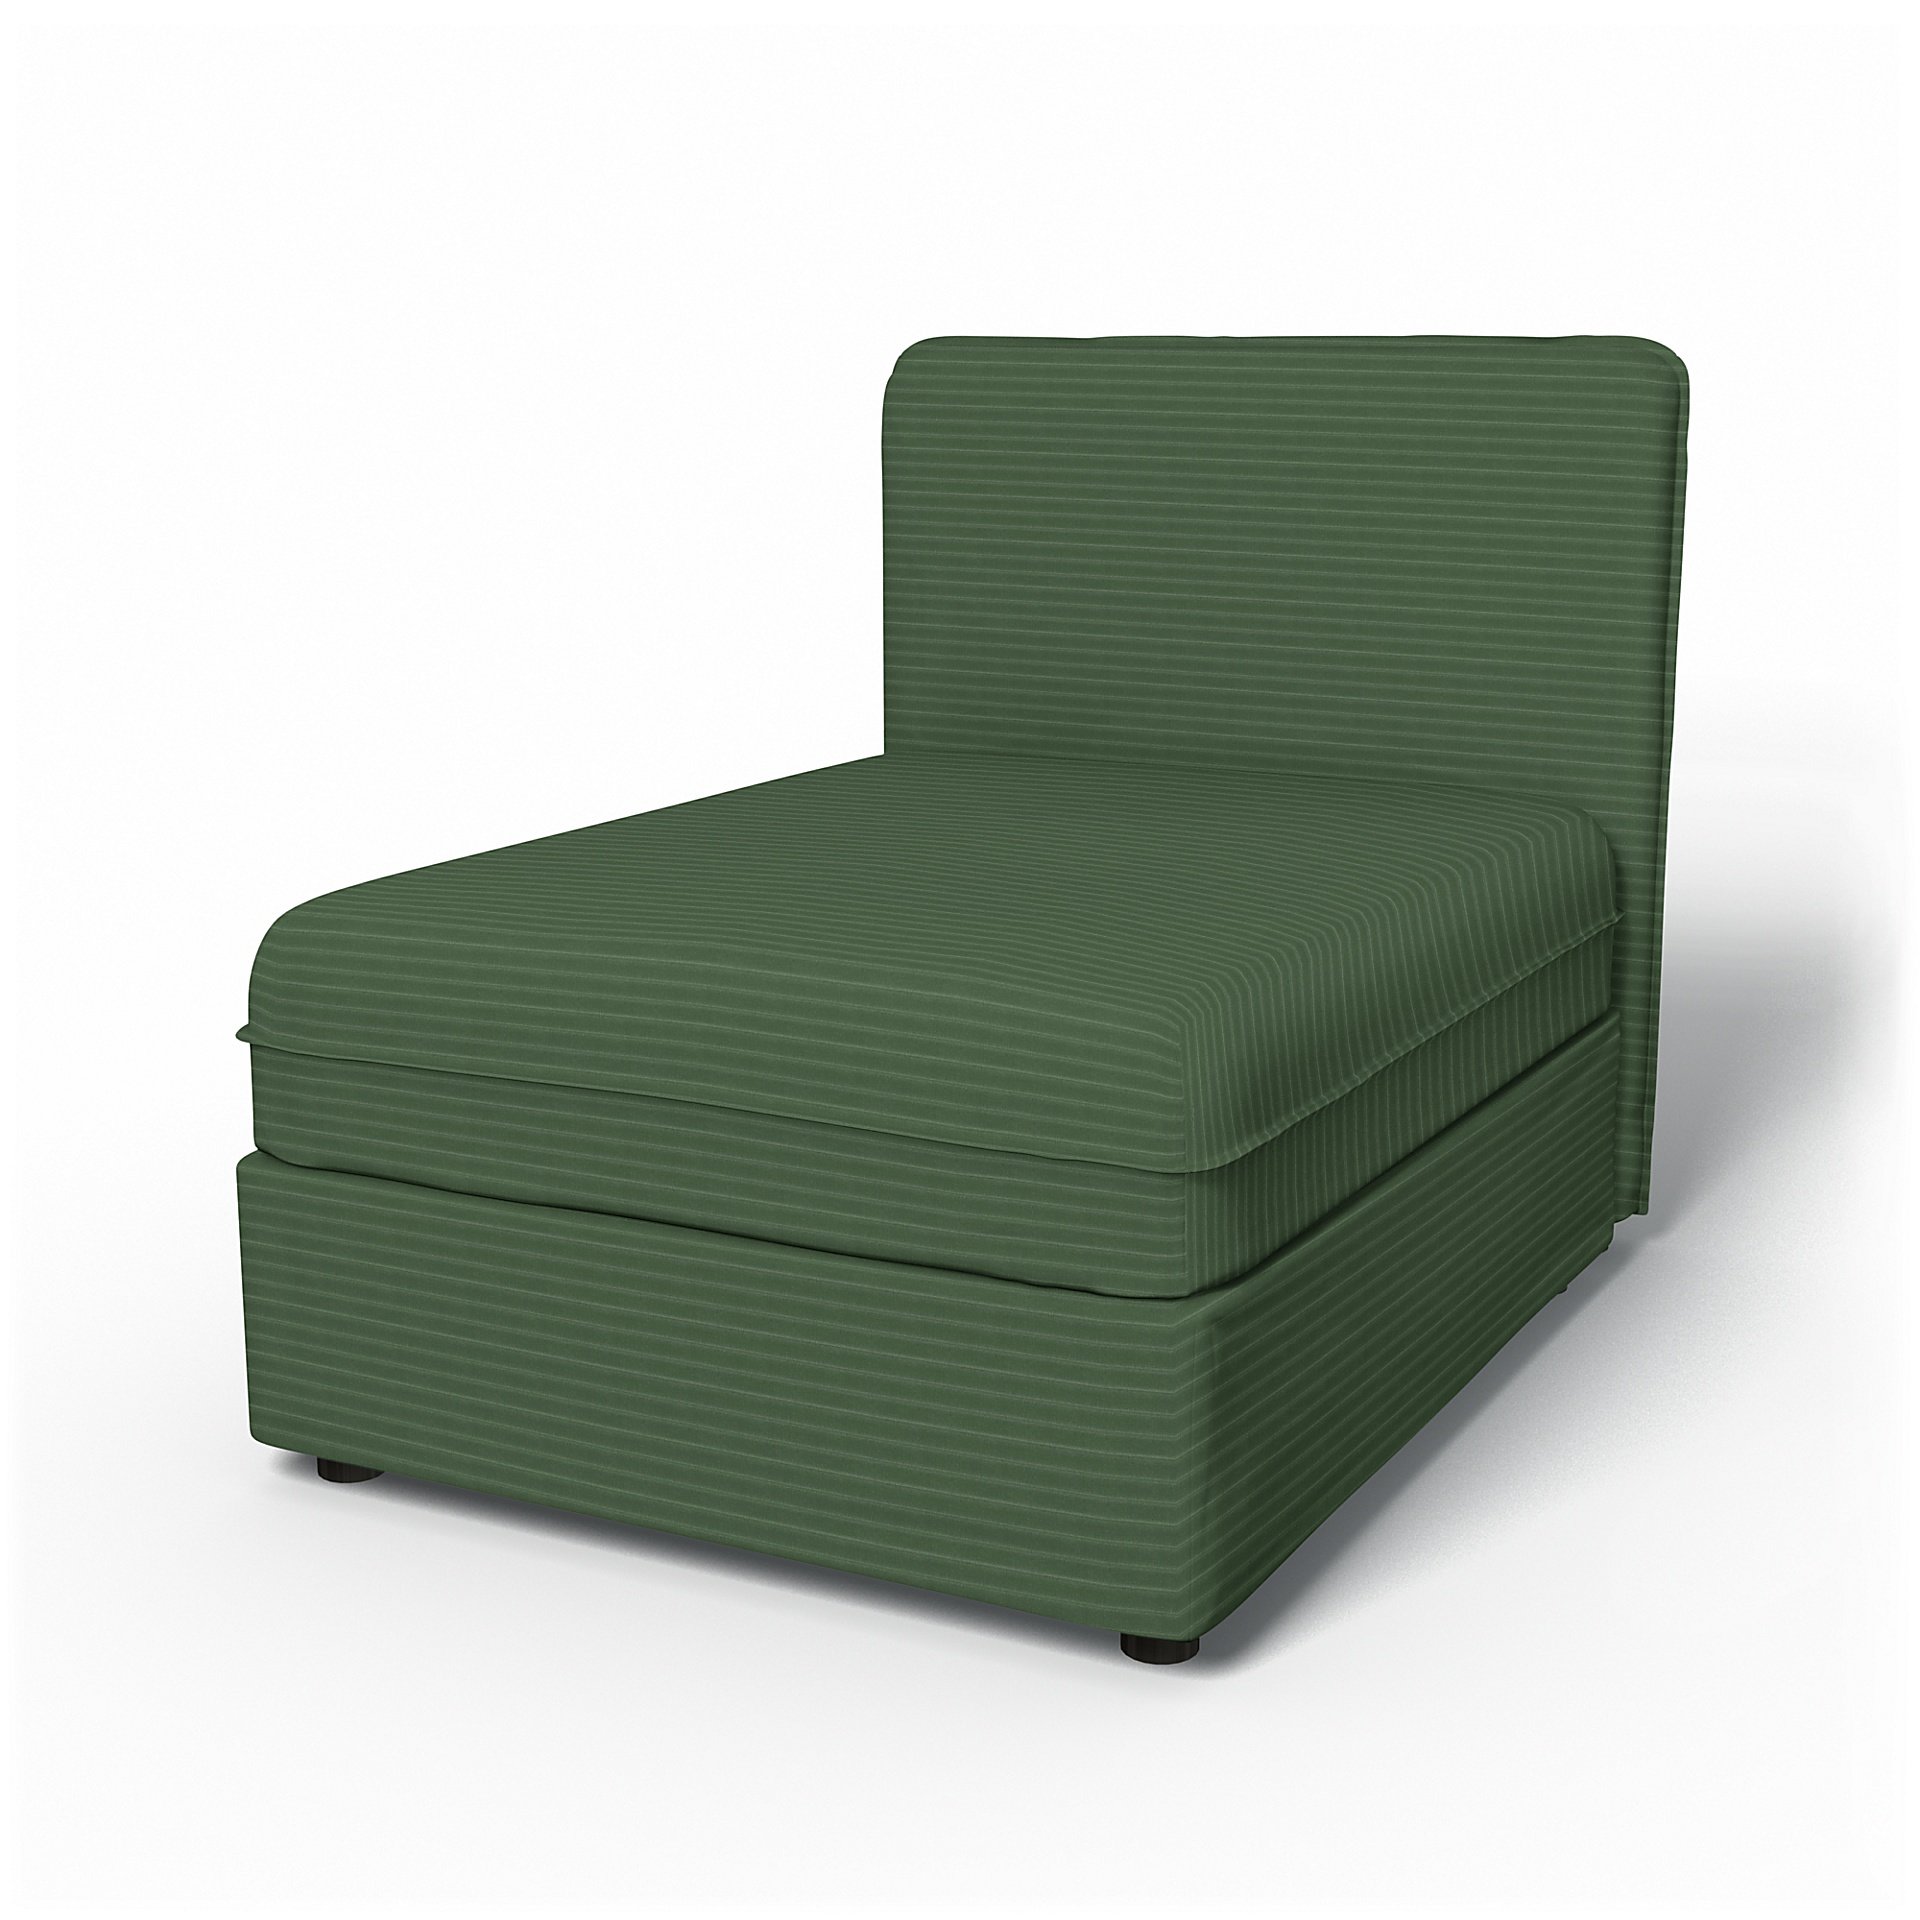 IKEA - Vallentuna Seat Module with Low Back Cover 80x100cm 32x39in, Palm Green, Corduroy - Bemz